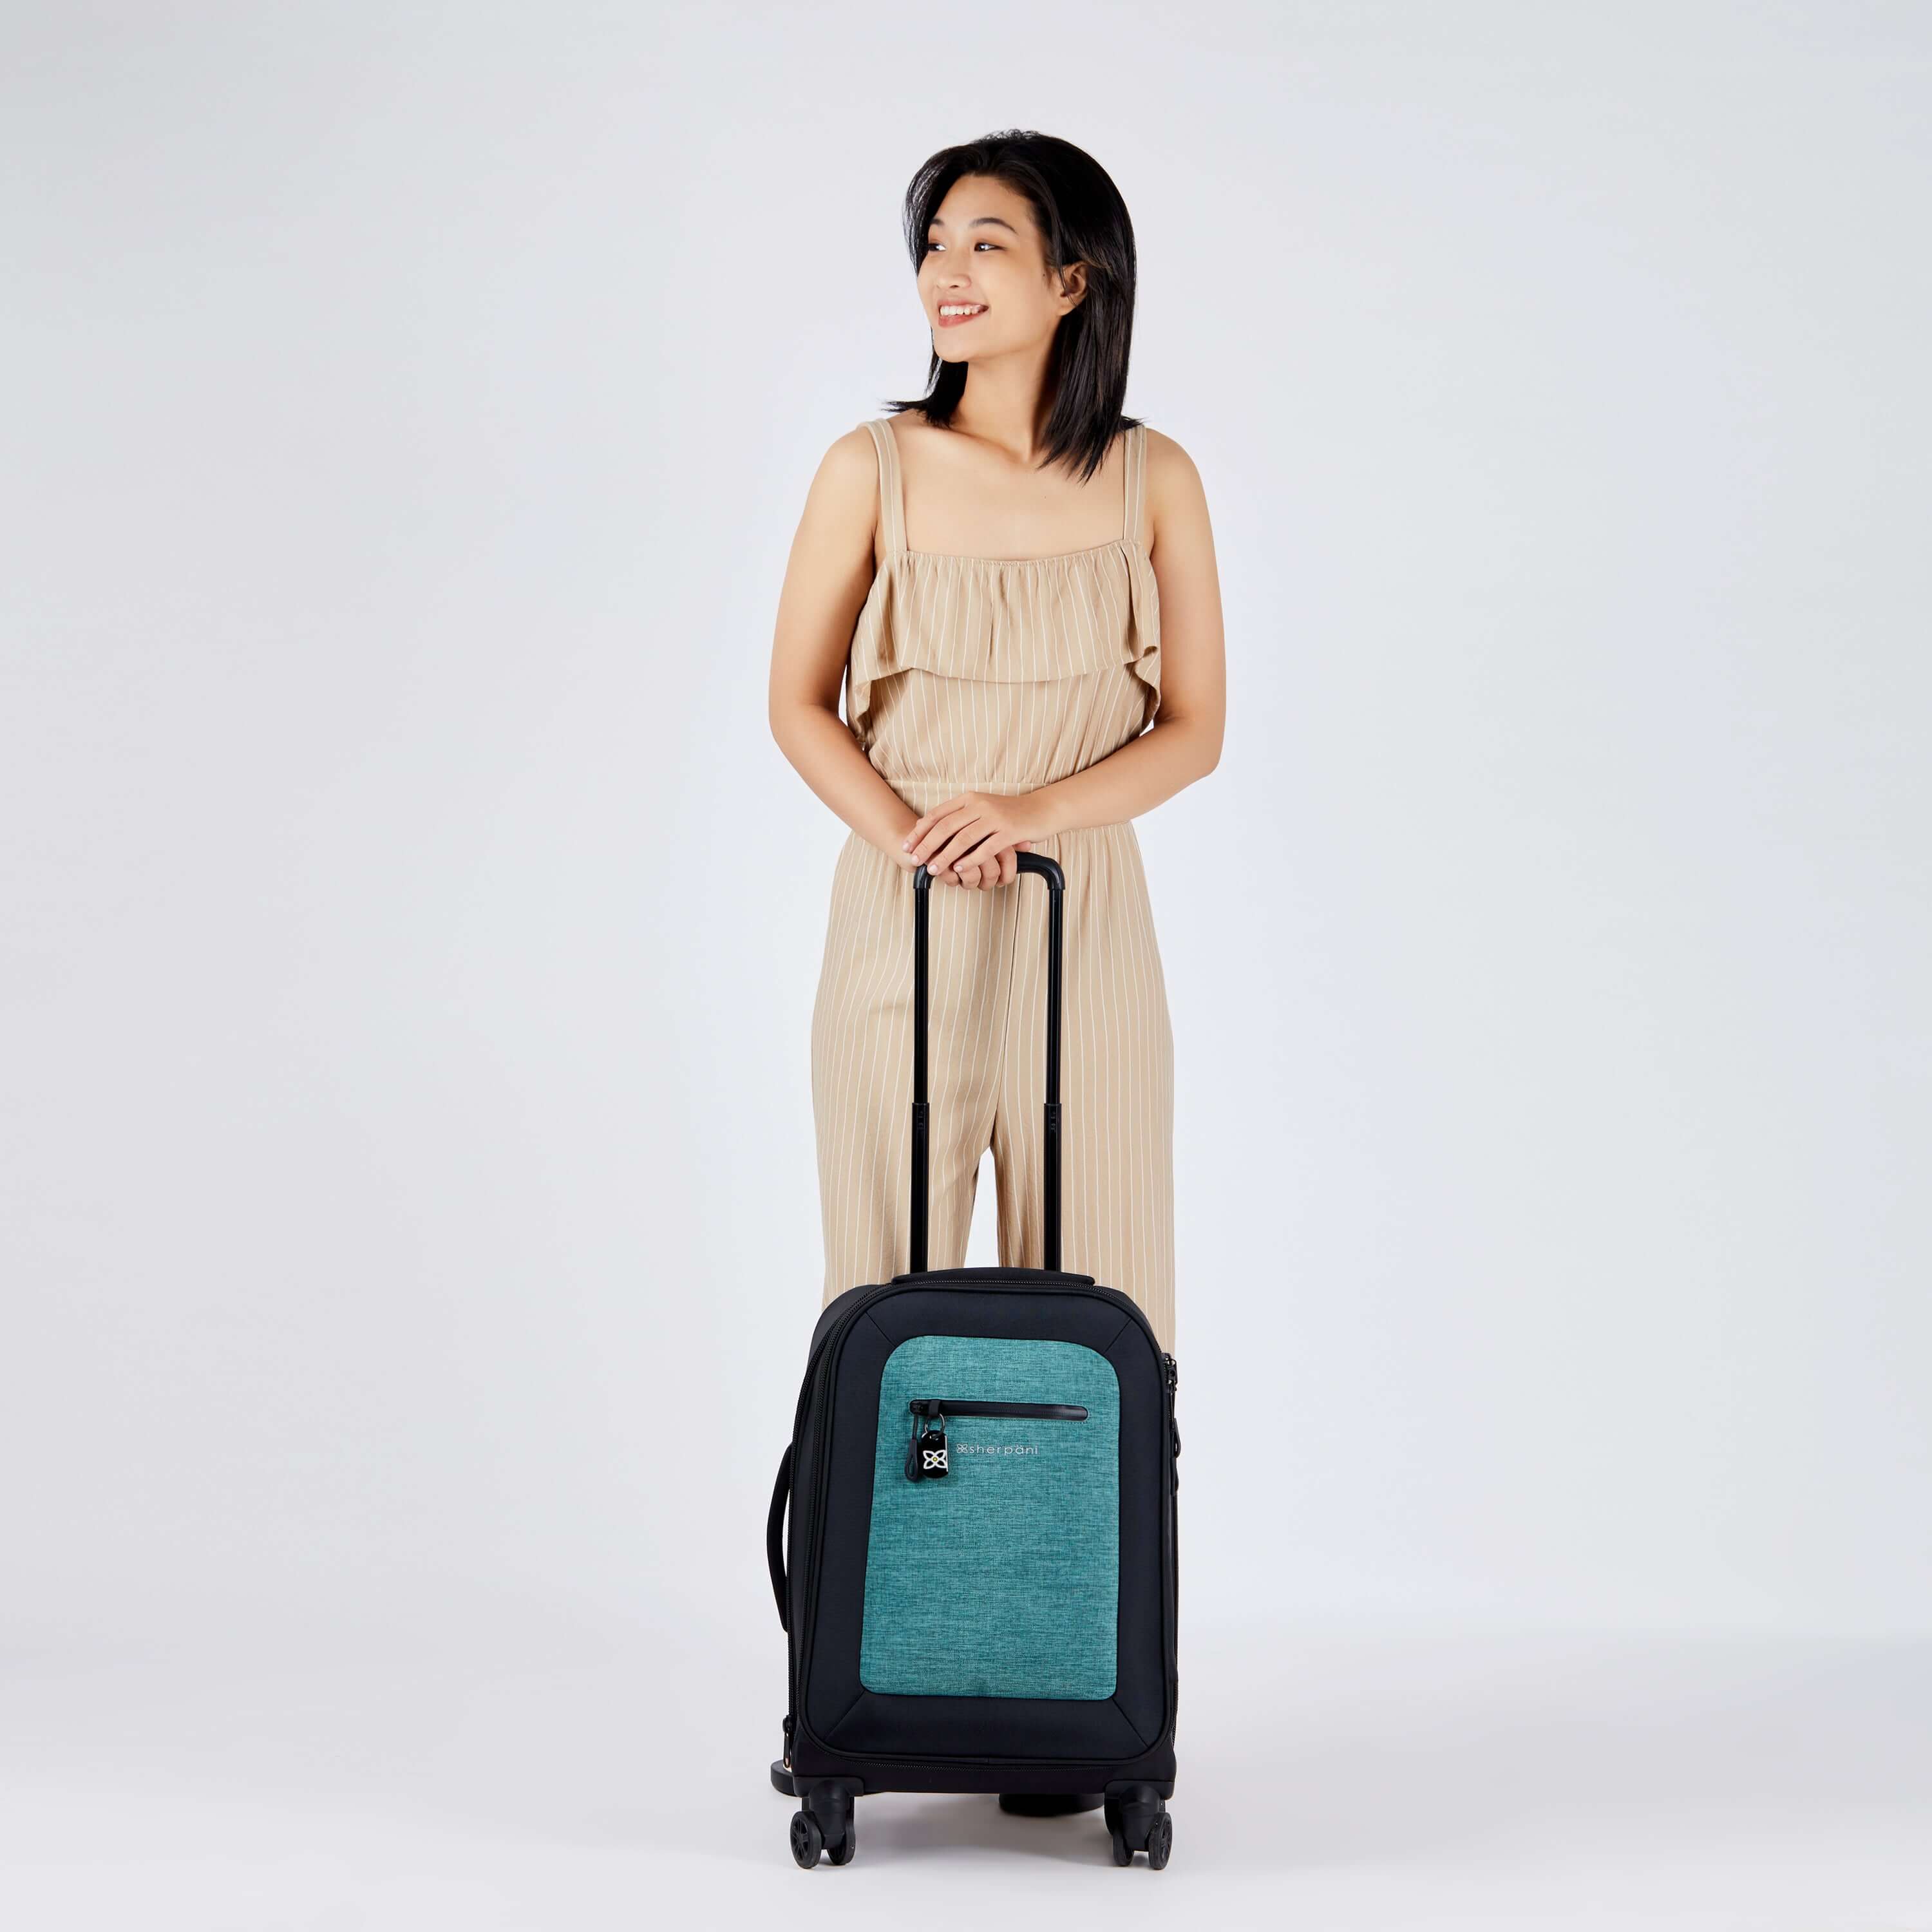 Full bodied view of dark haired model facing the camera and smiling over her right shoulder. She is wearing a tan jumpsuit. In front of her stands Sherpani's Anti-Theft luggage, the Latitude in Teal, which she is holding by the handle. 